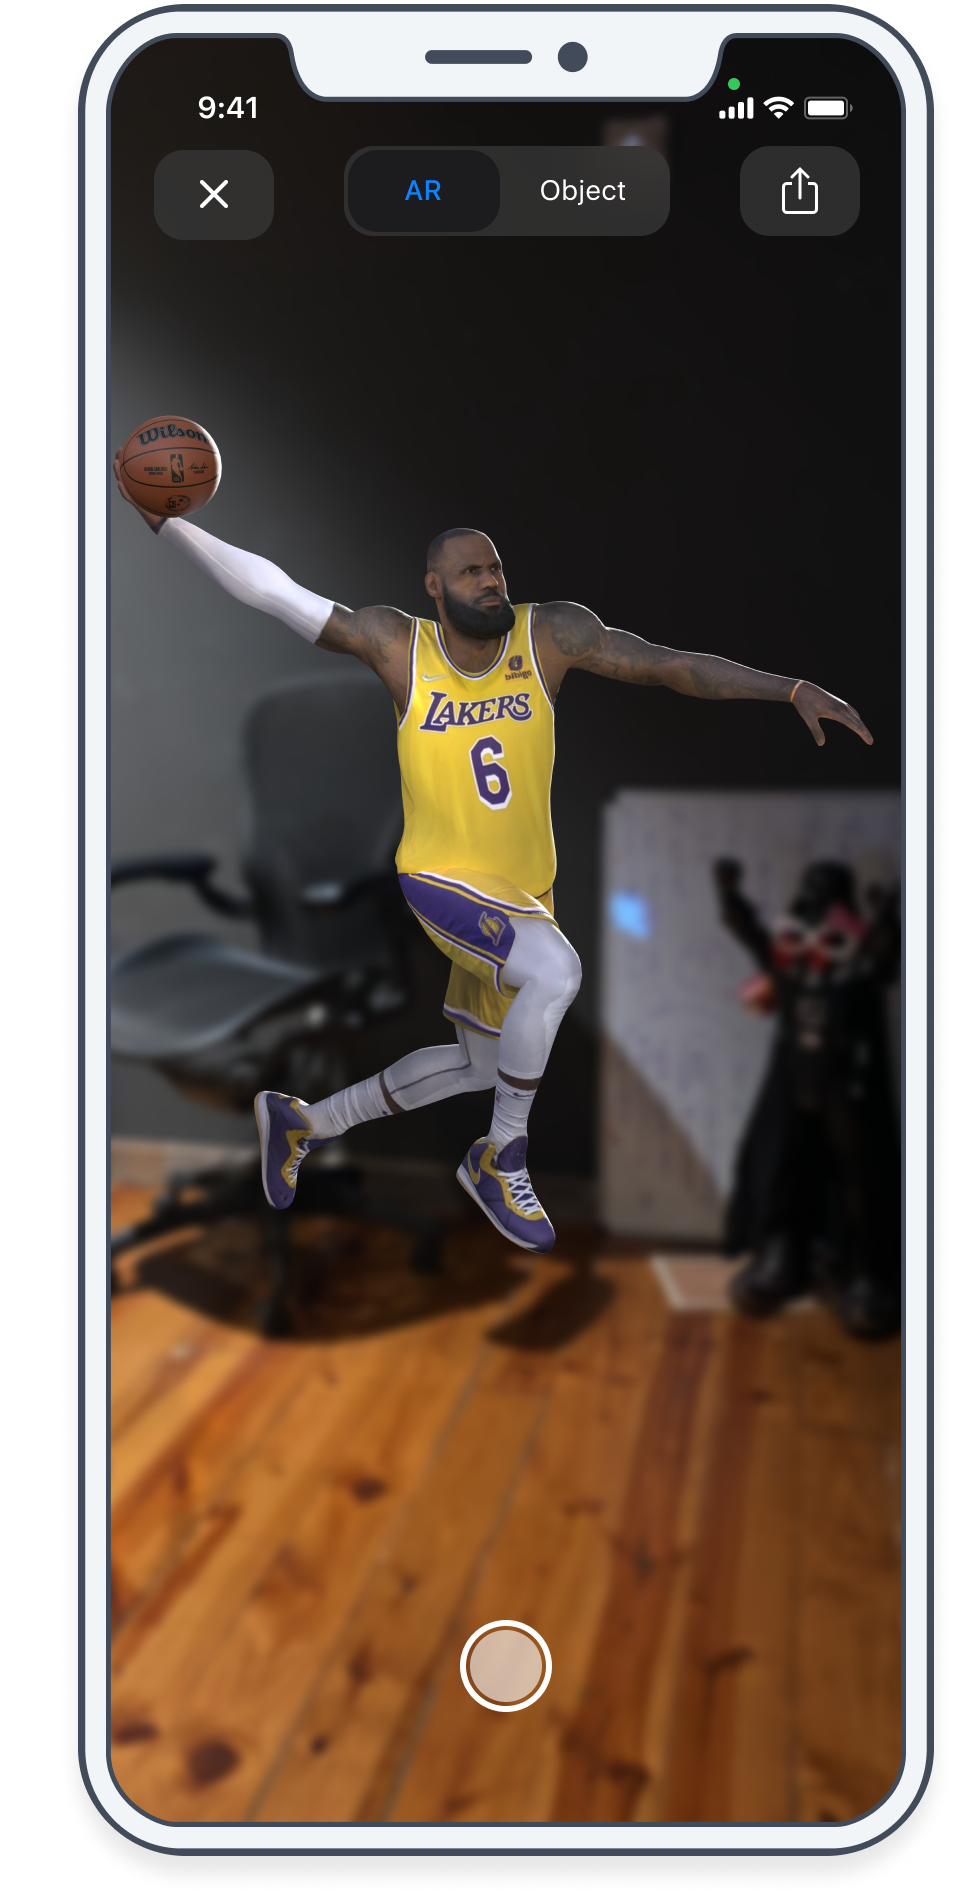 AT&T to Flex 5G During NBA All-Star Weekend